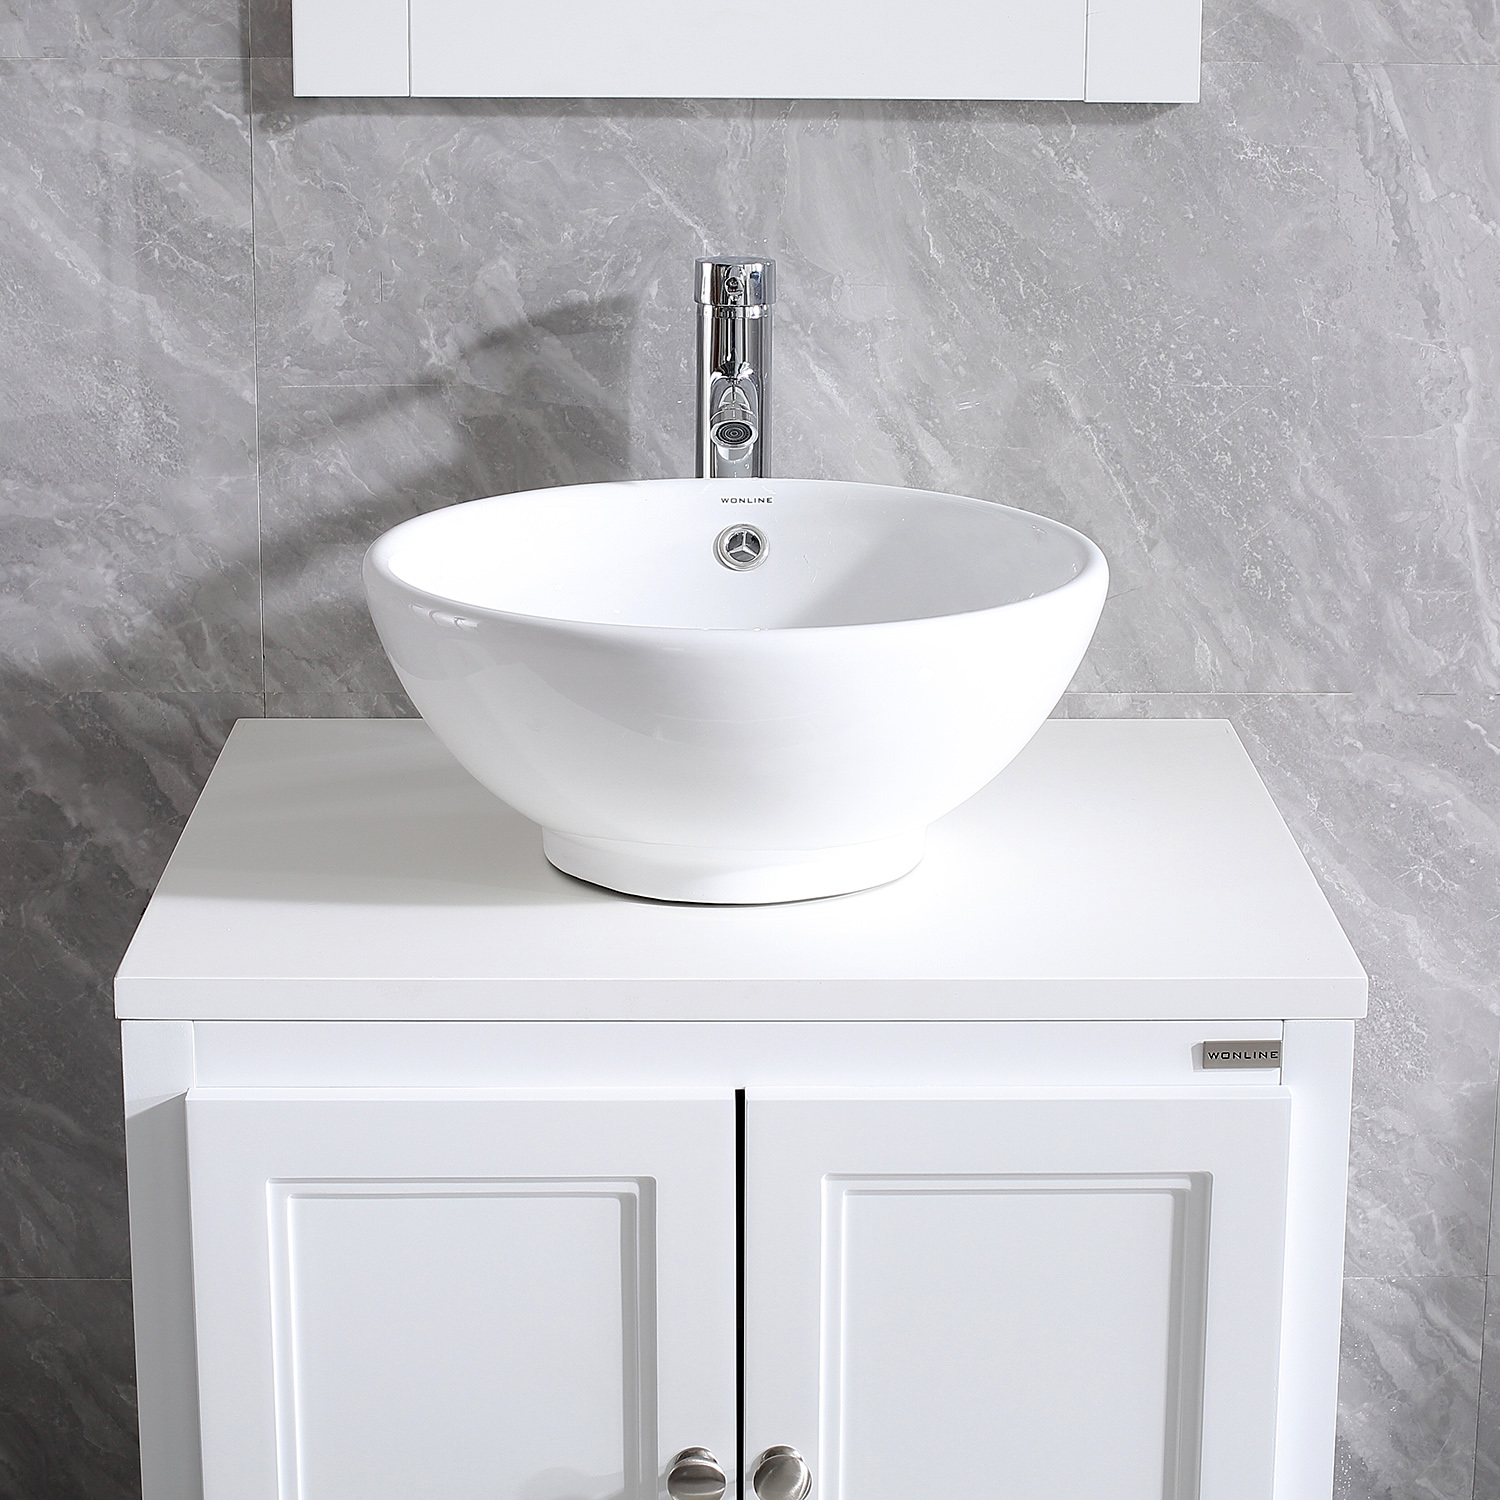 Wonline Round White Porcelain Ceramic Bathroom Vessel Sink with Overflow, Equipped with Chrome Faucet Pop-up Drain Combo - image 2 of 4